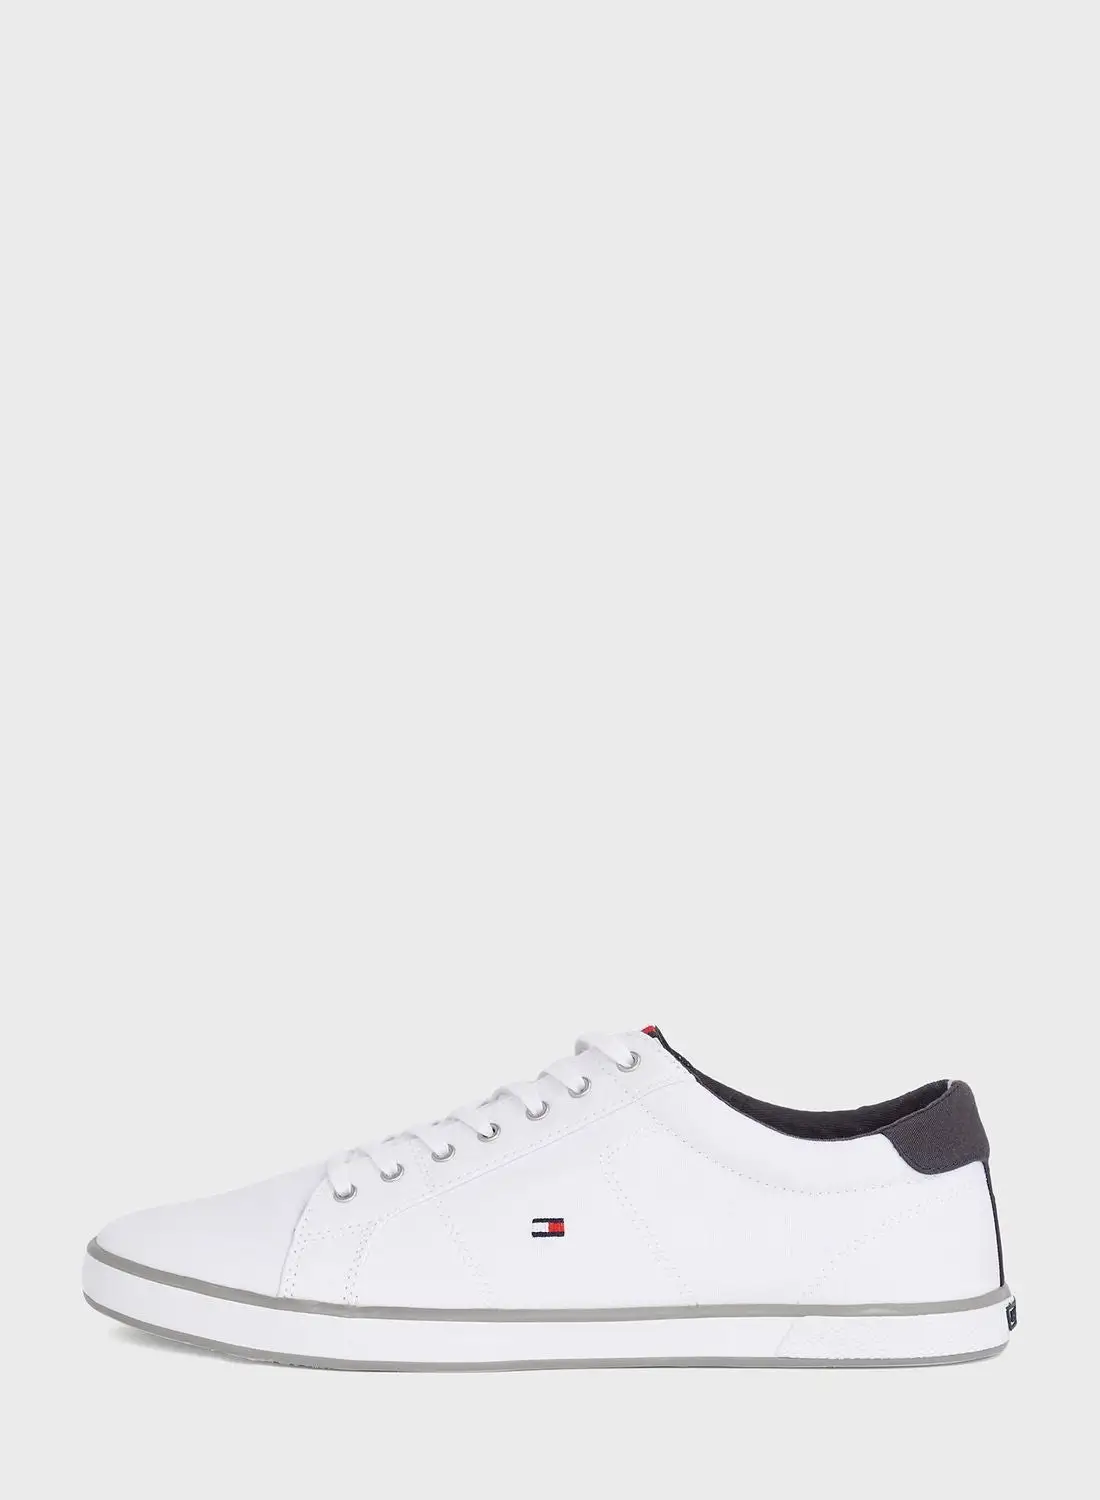 TOMMY HILFIGER Logo Low Top Sneakers